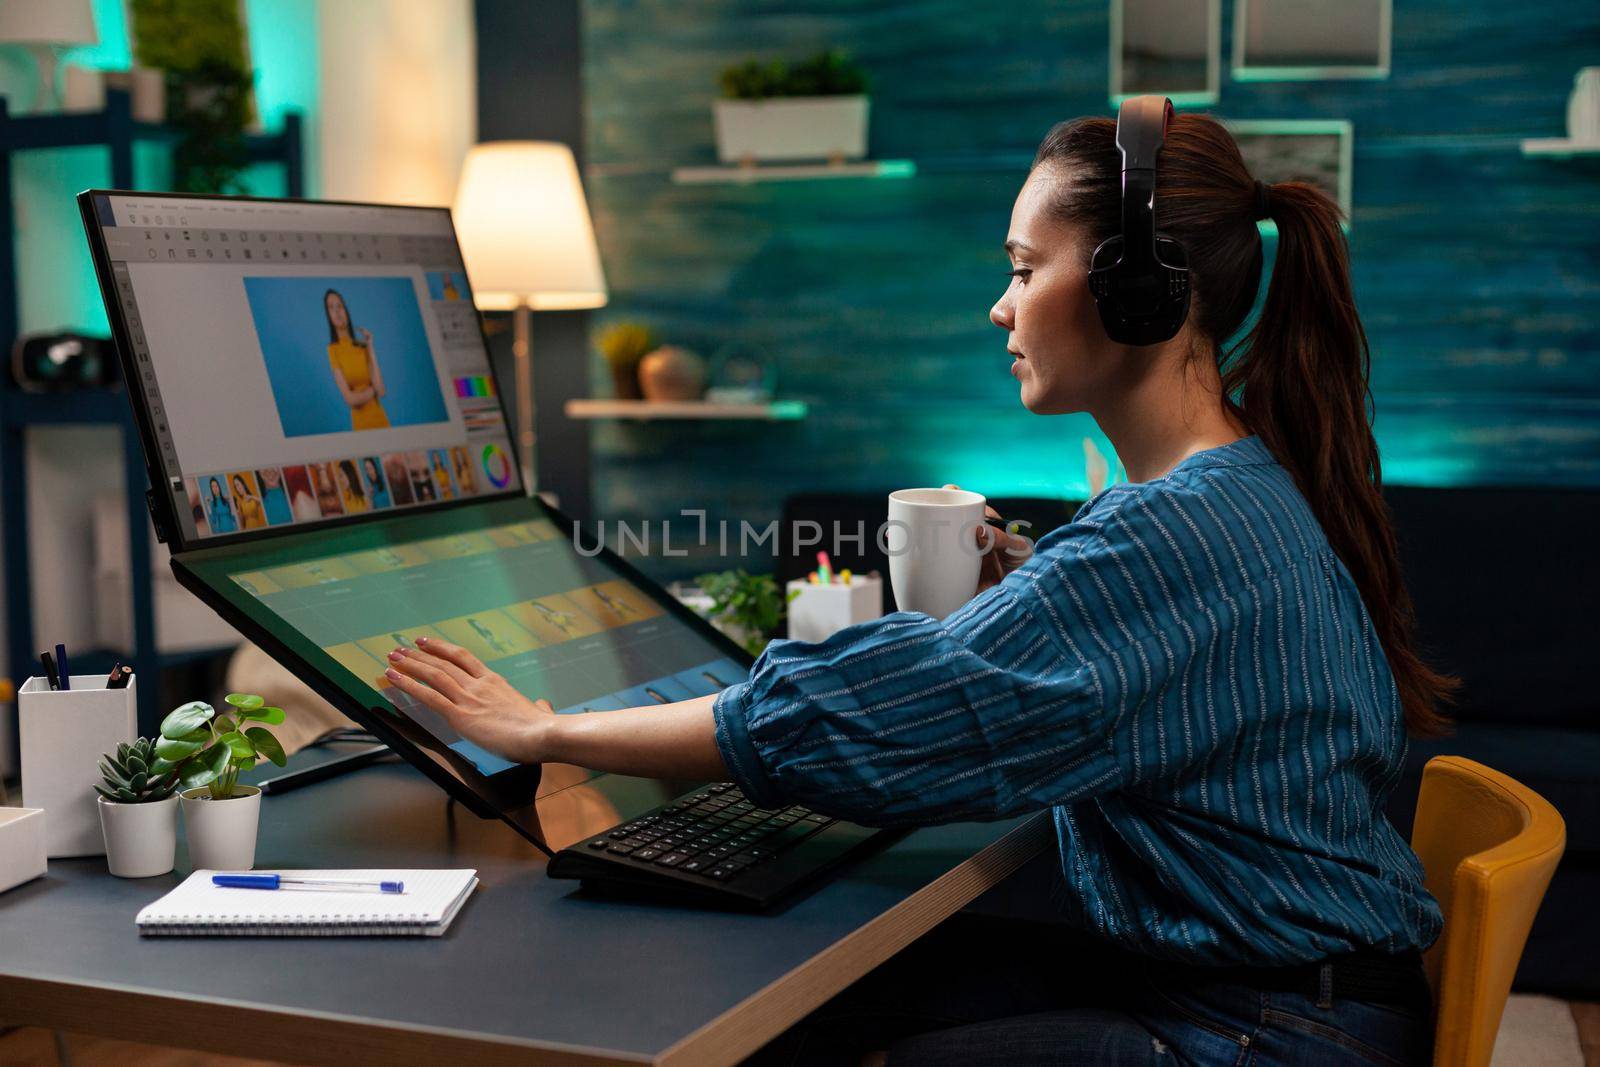 Graphic software editor with headphones working on photography project using touchpad computer monitor sceen display. Woman at workplace doing photo retouching with modern interface